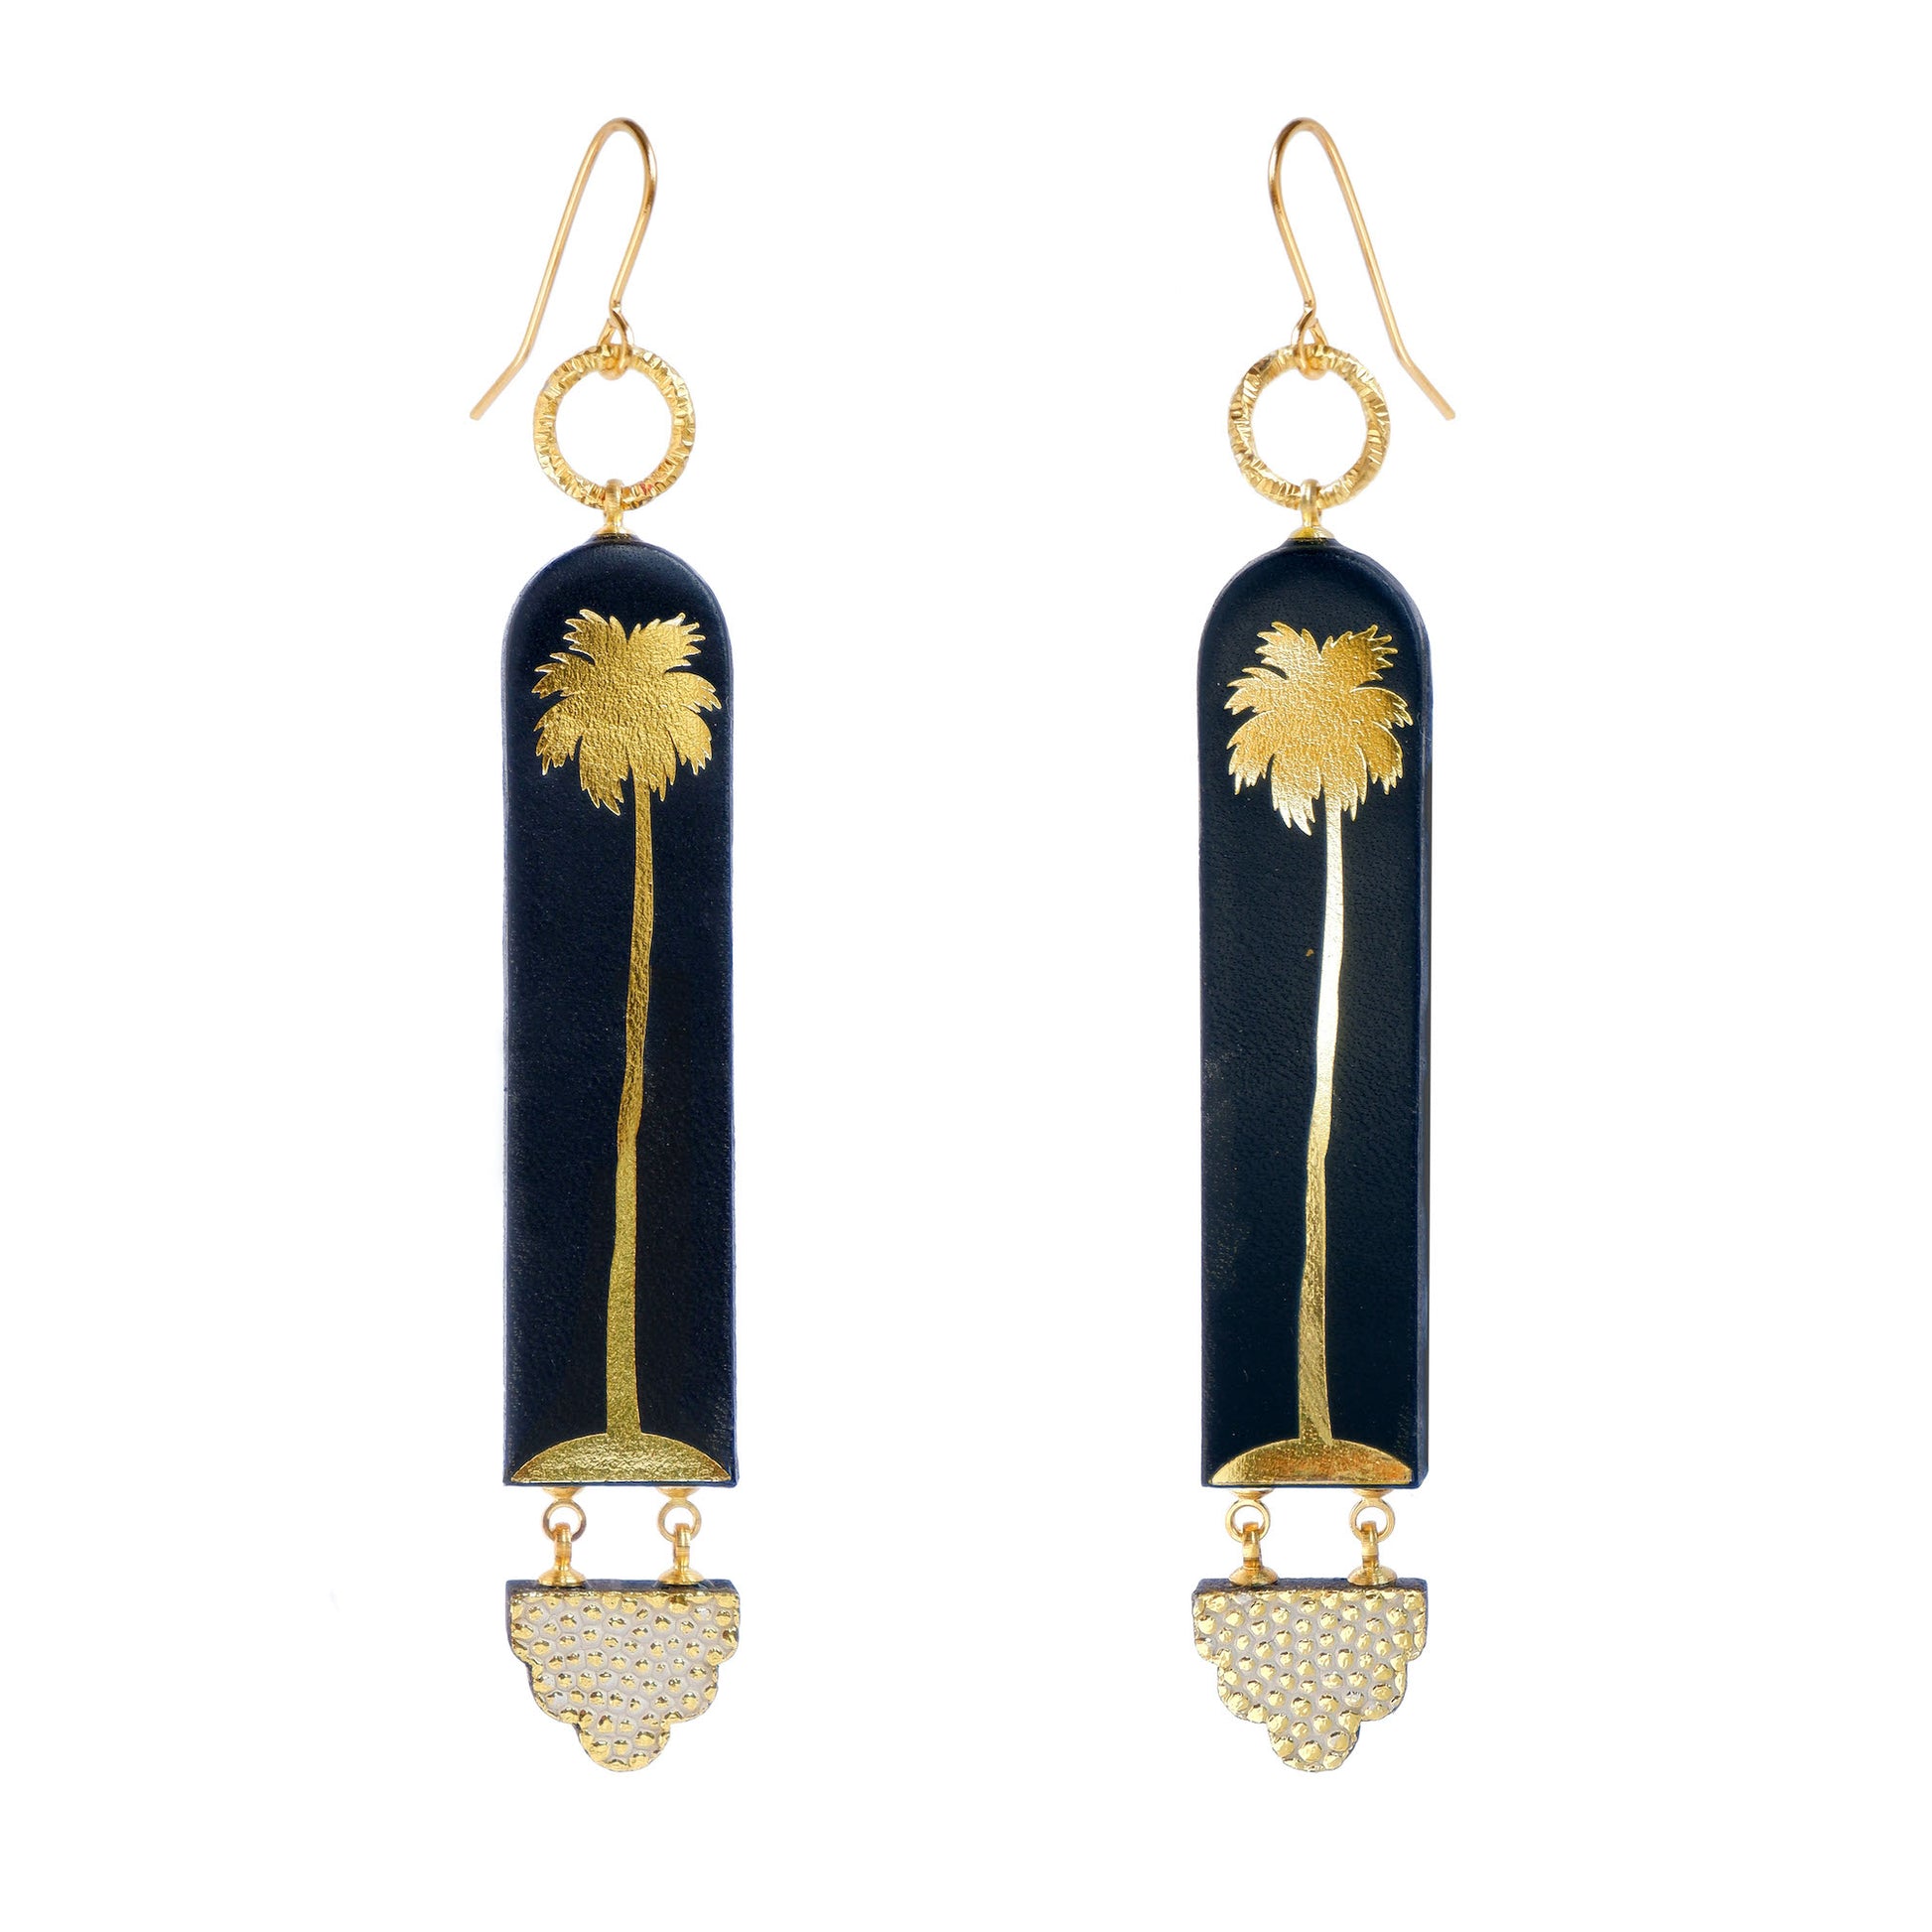 long drop hook earrings - arched strips in black leather, printed with gold palm trees